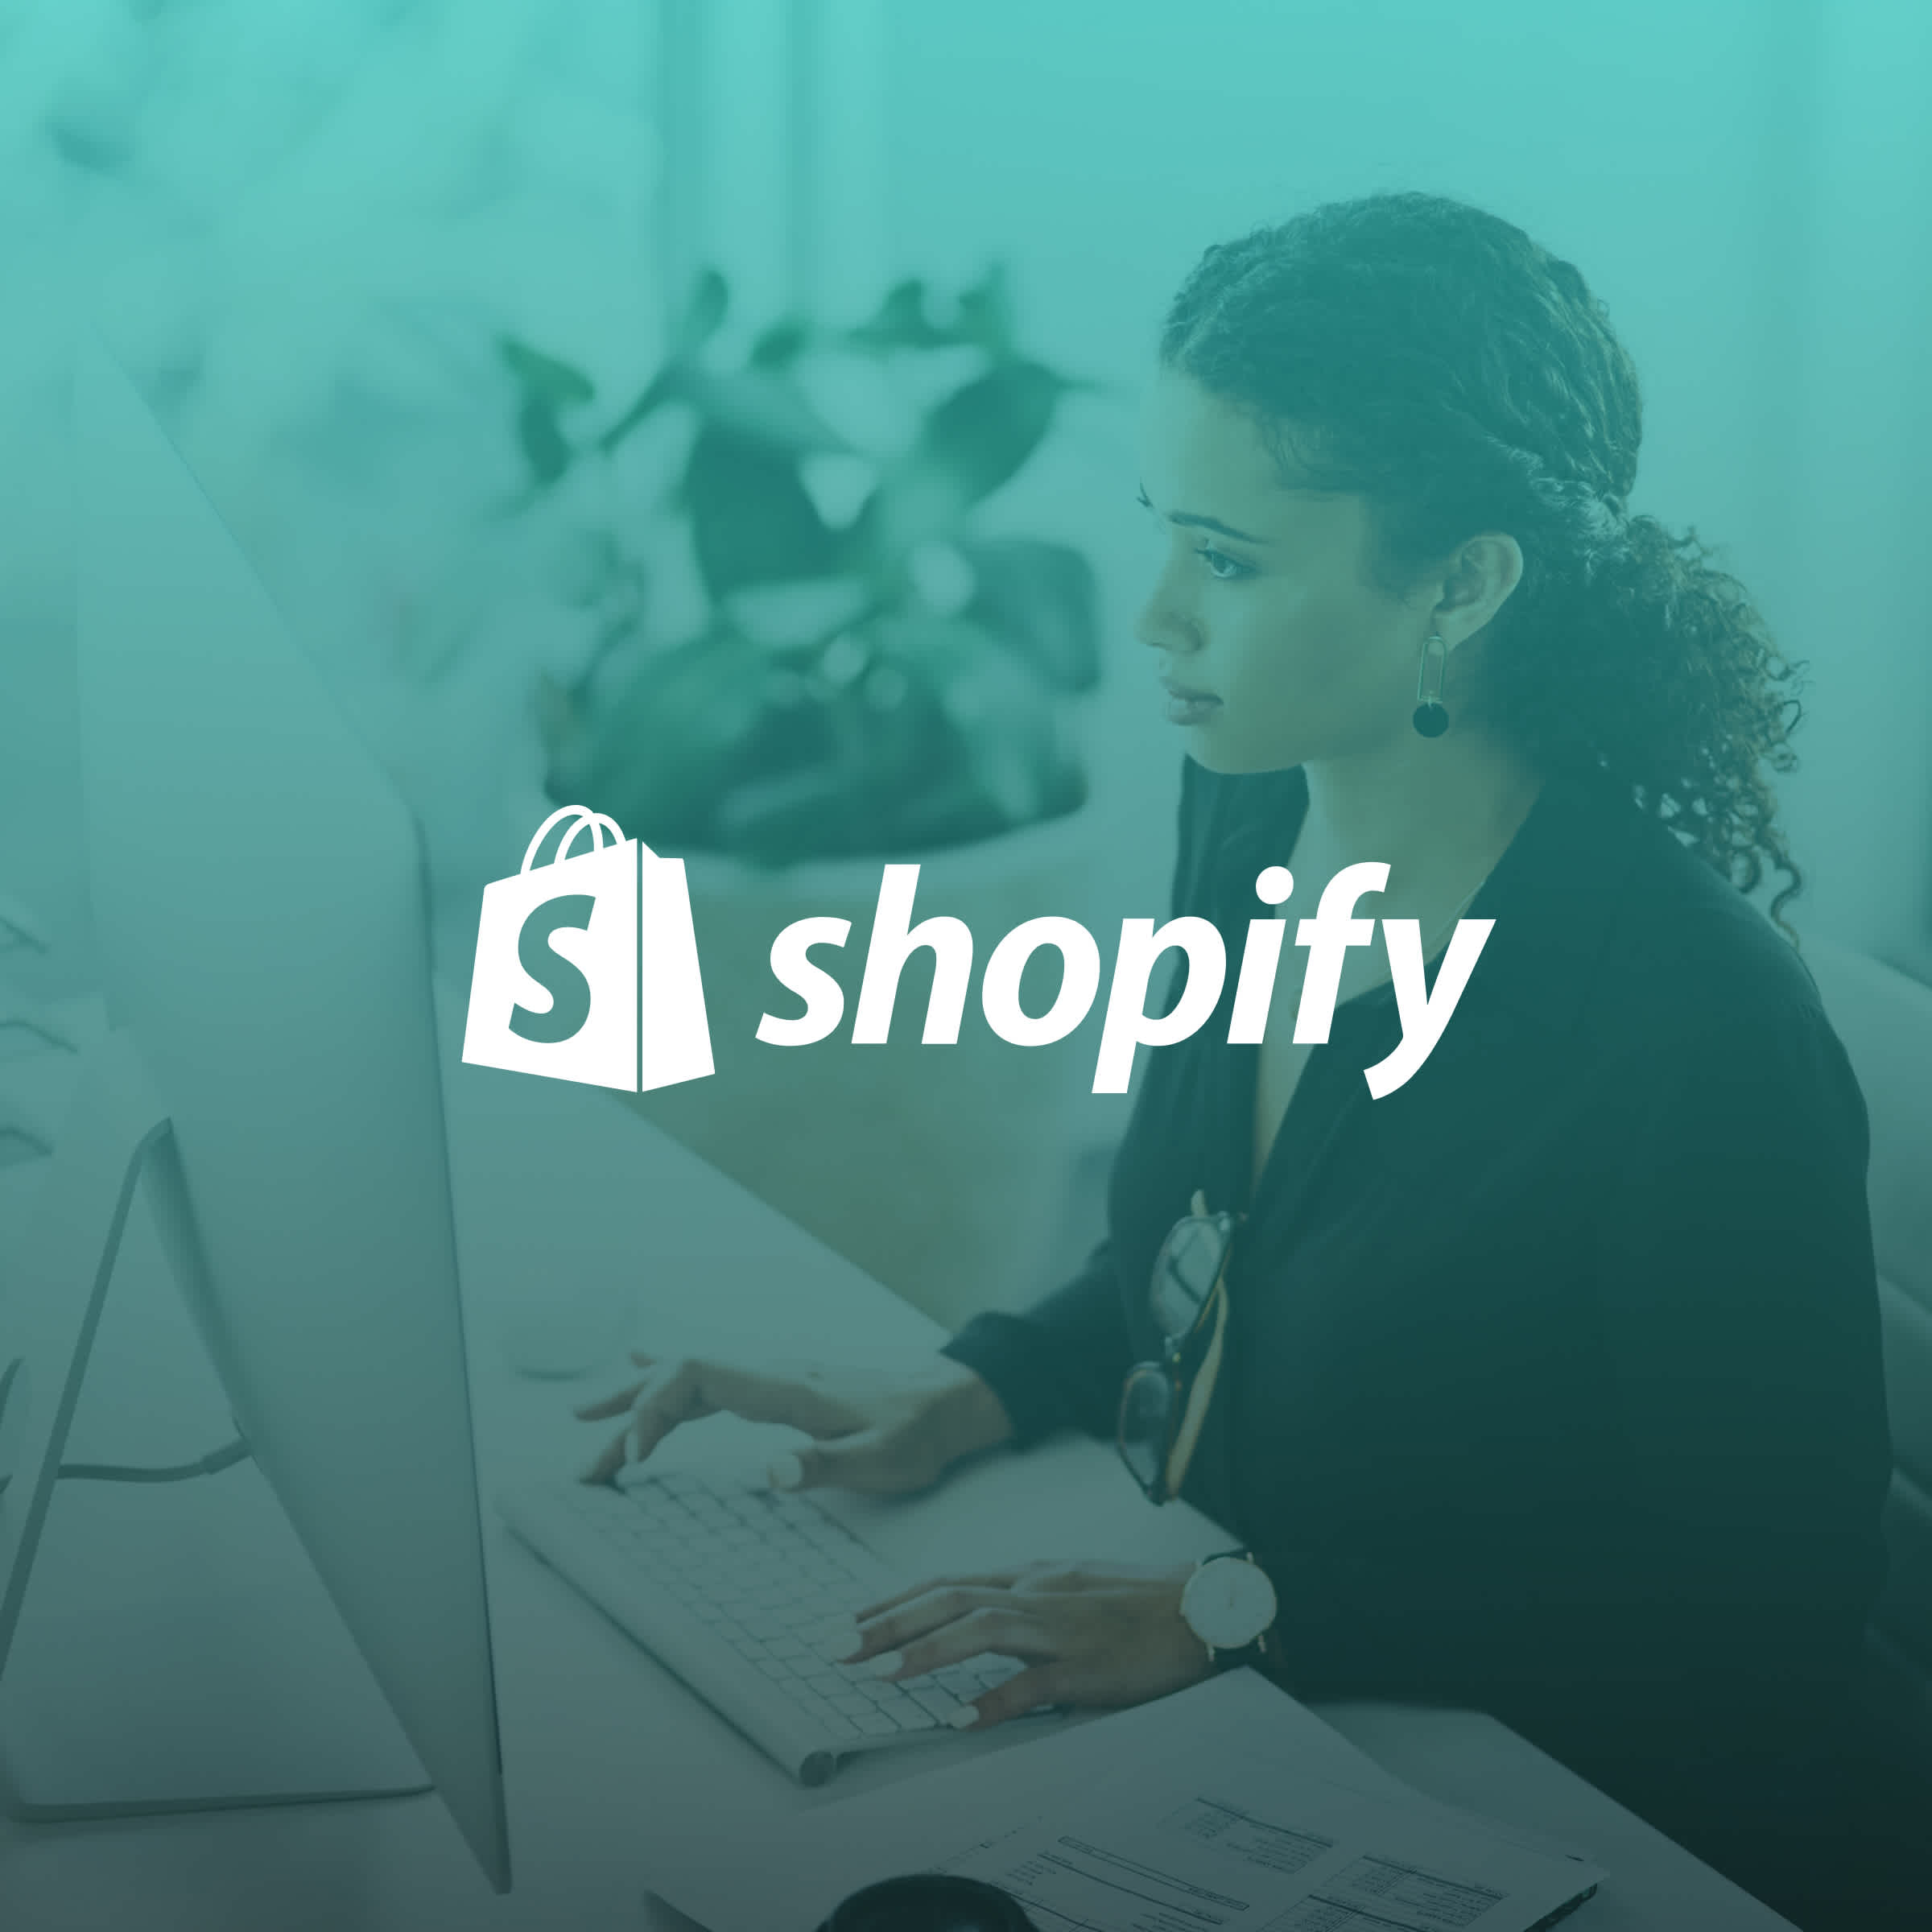 Shopify improves their help center with Session Replay